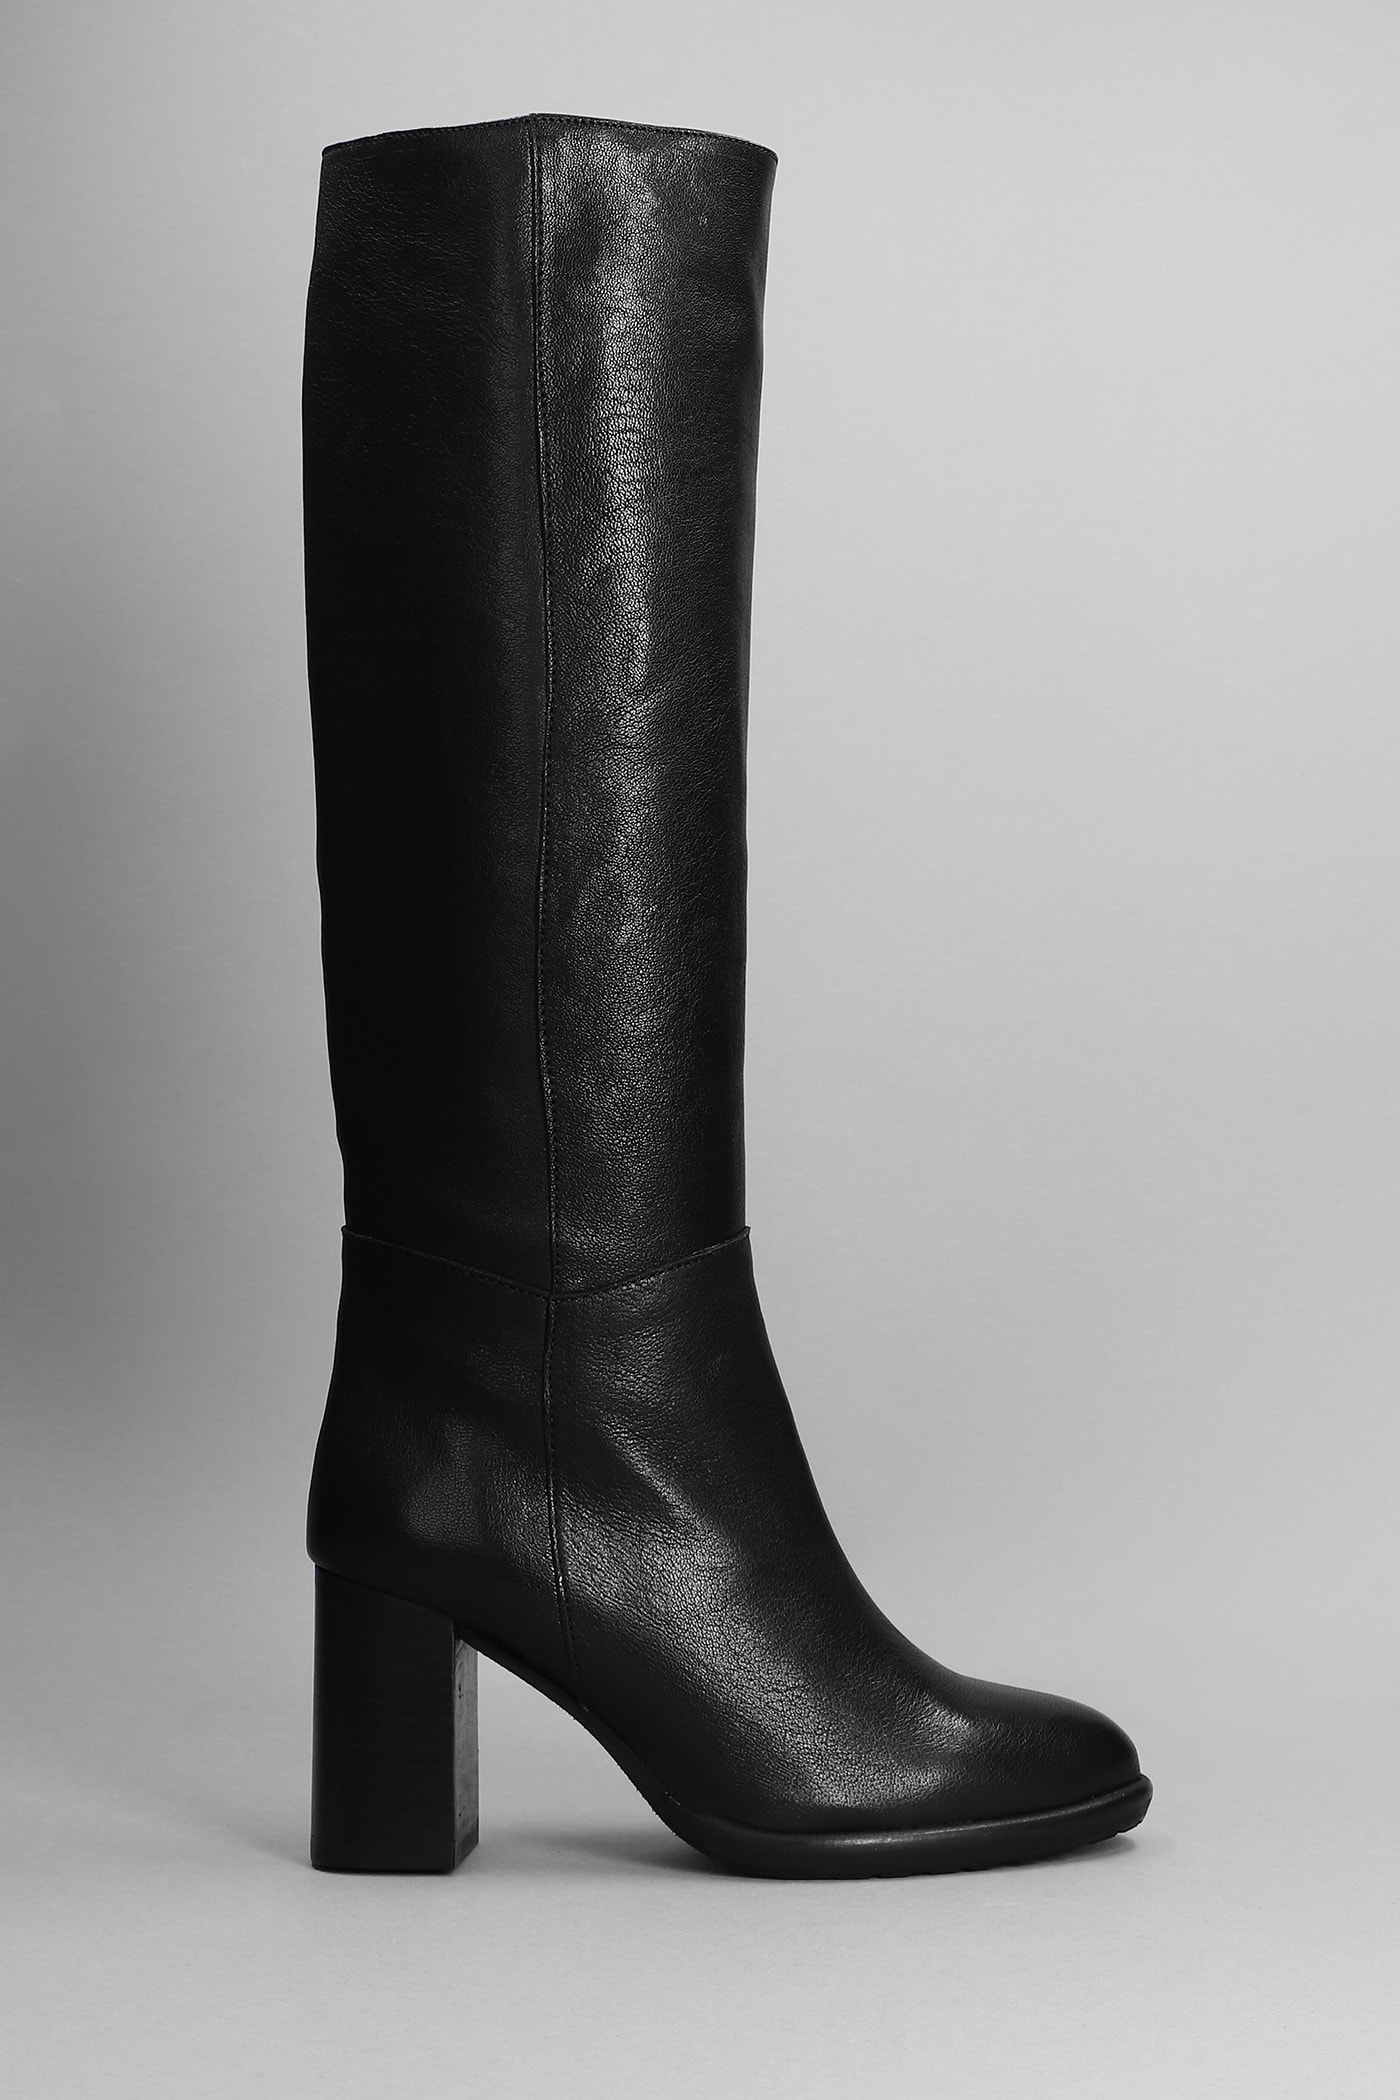 Pedro Miralles High Heels Boots In Black Leather